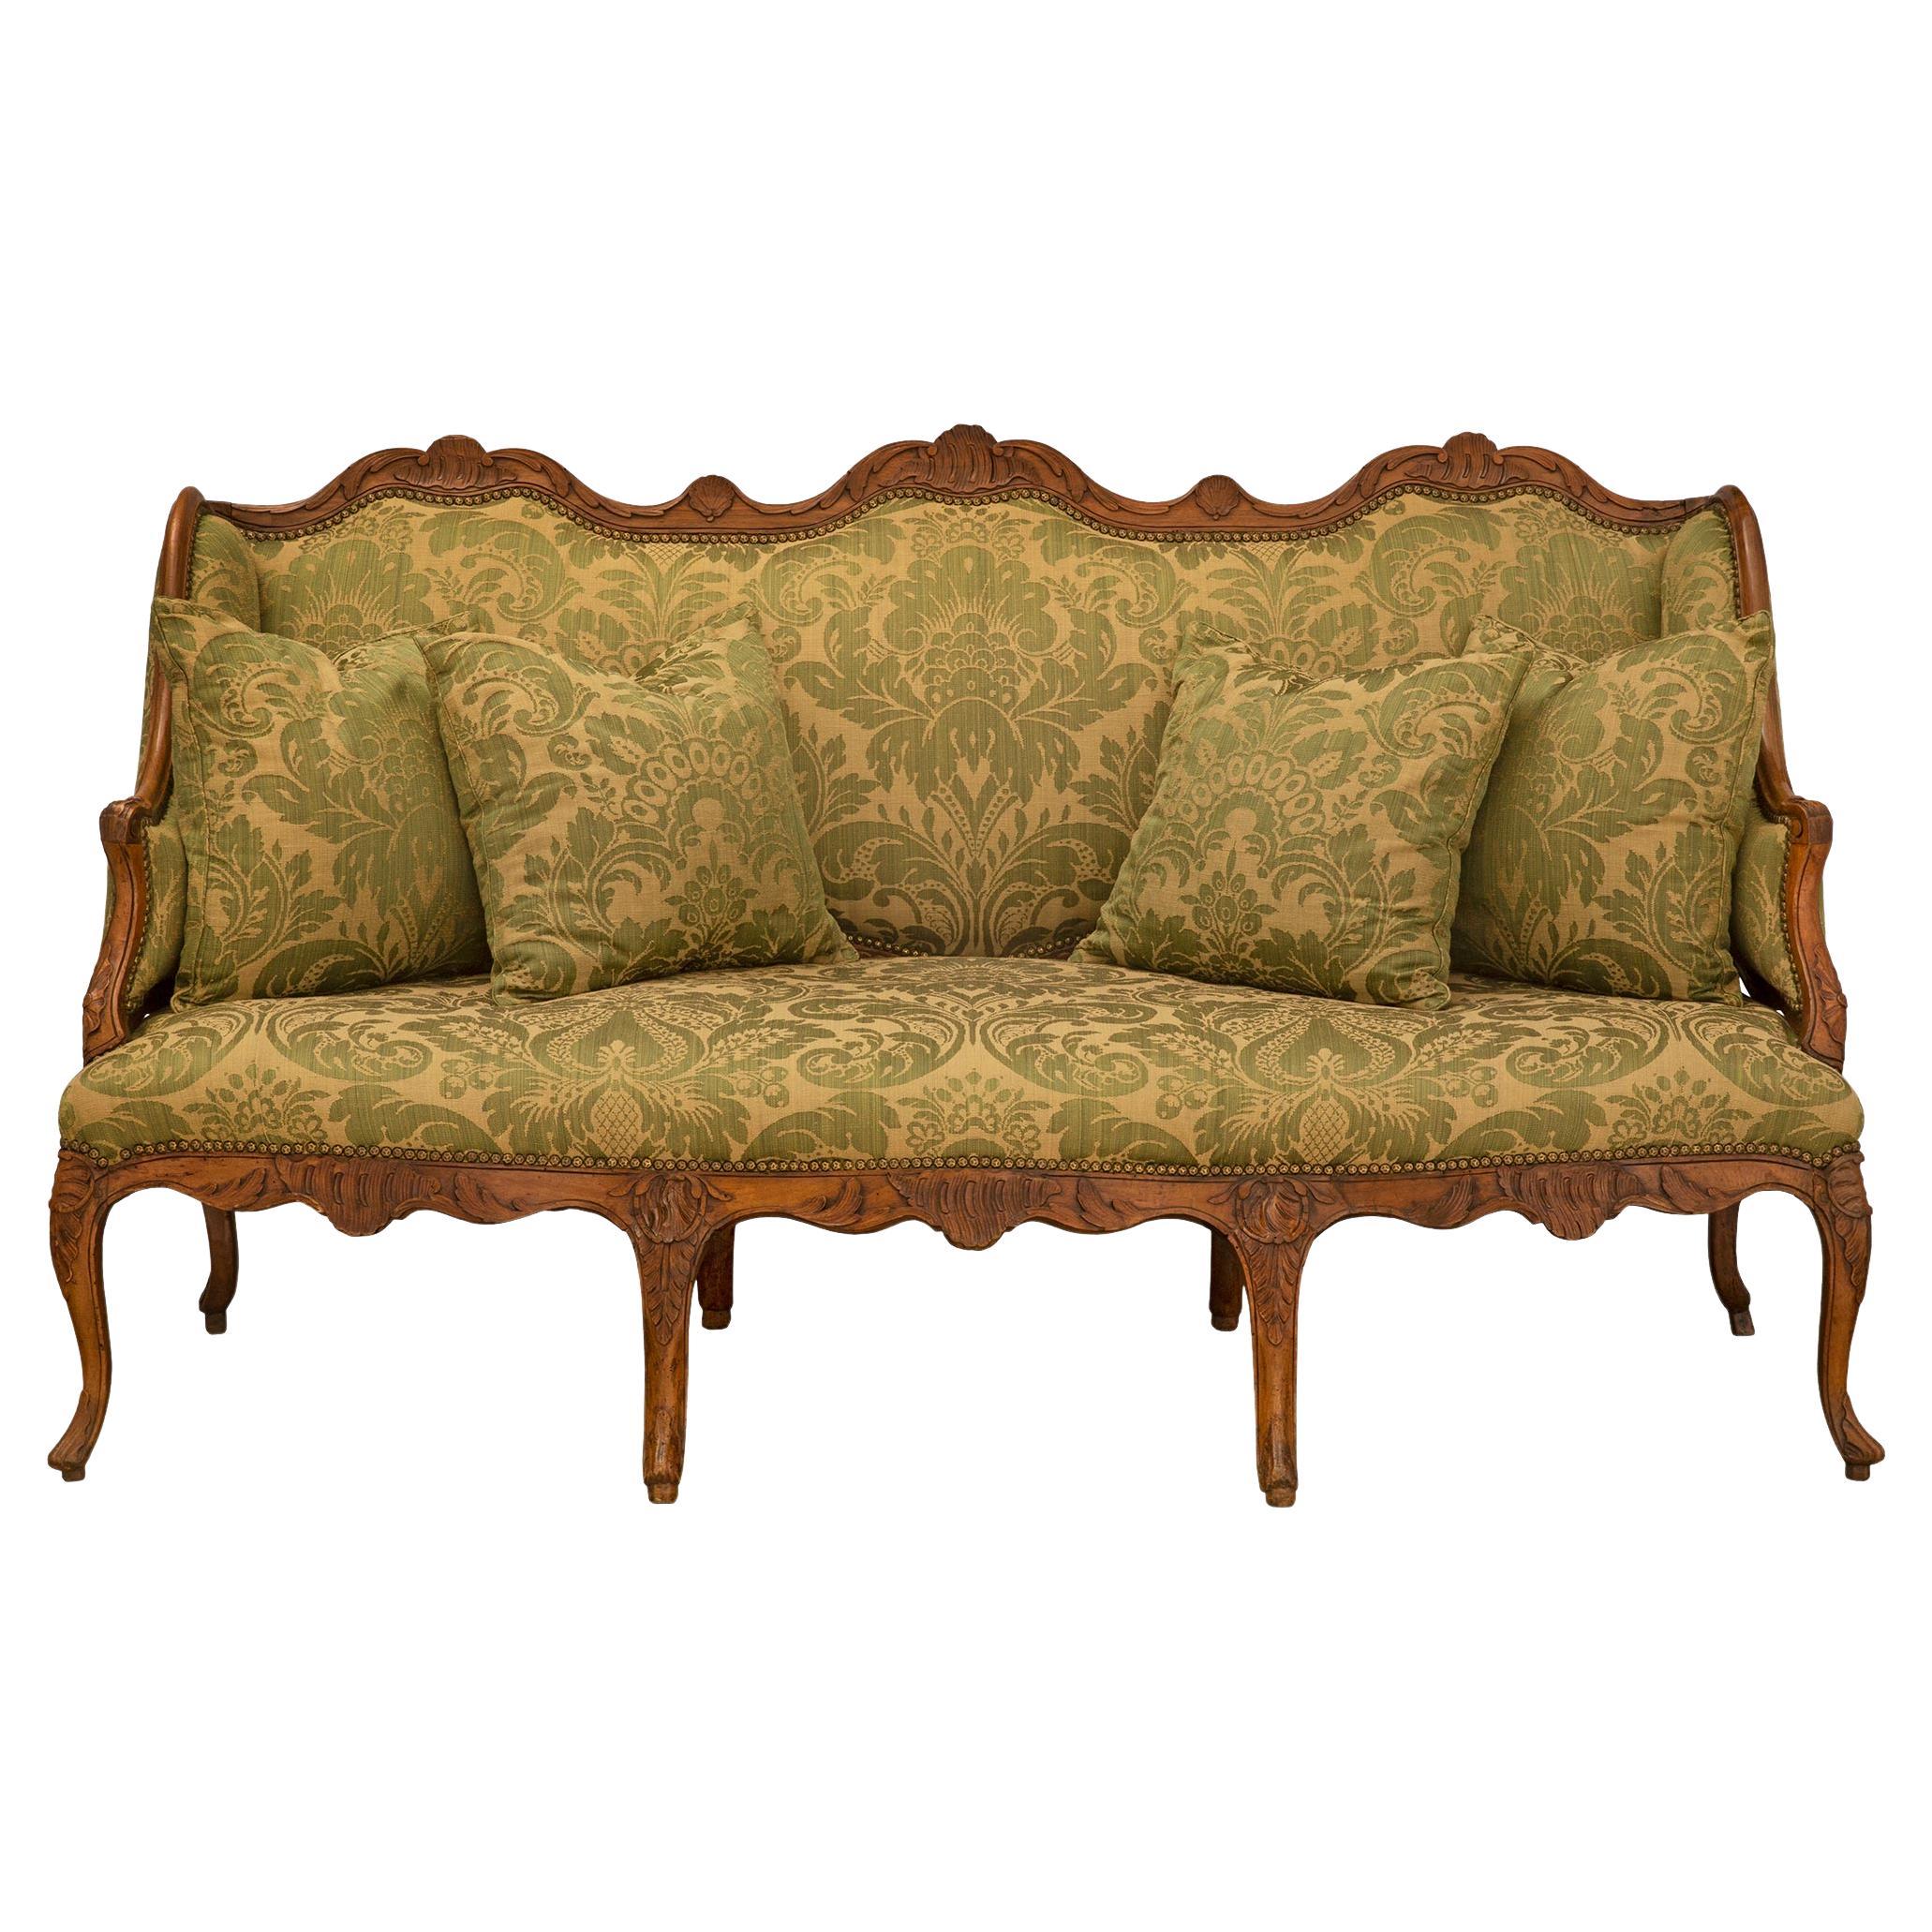 A large and richly carved French 18th century Louis XV period Walnut settee For Sale